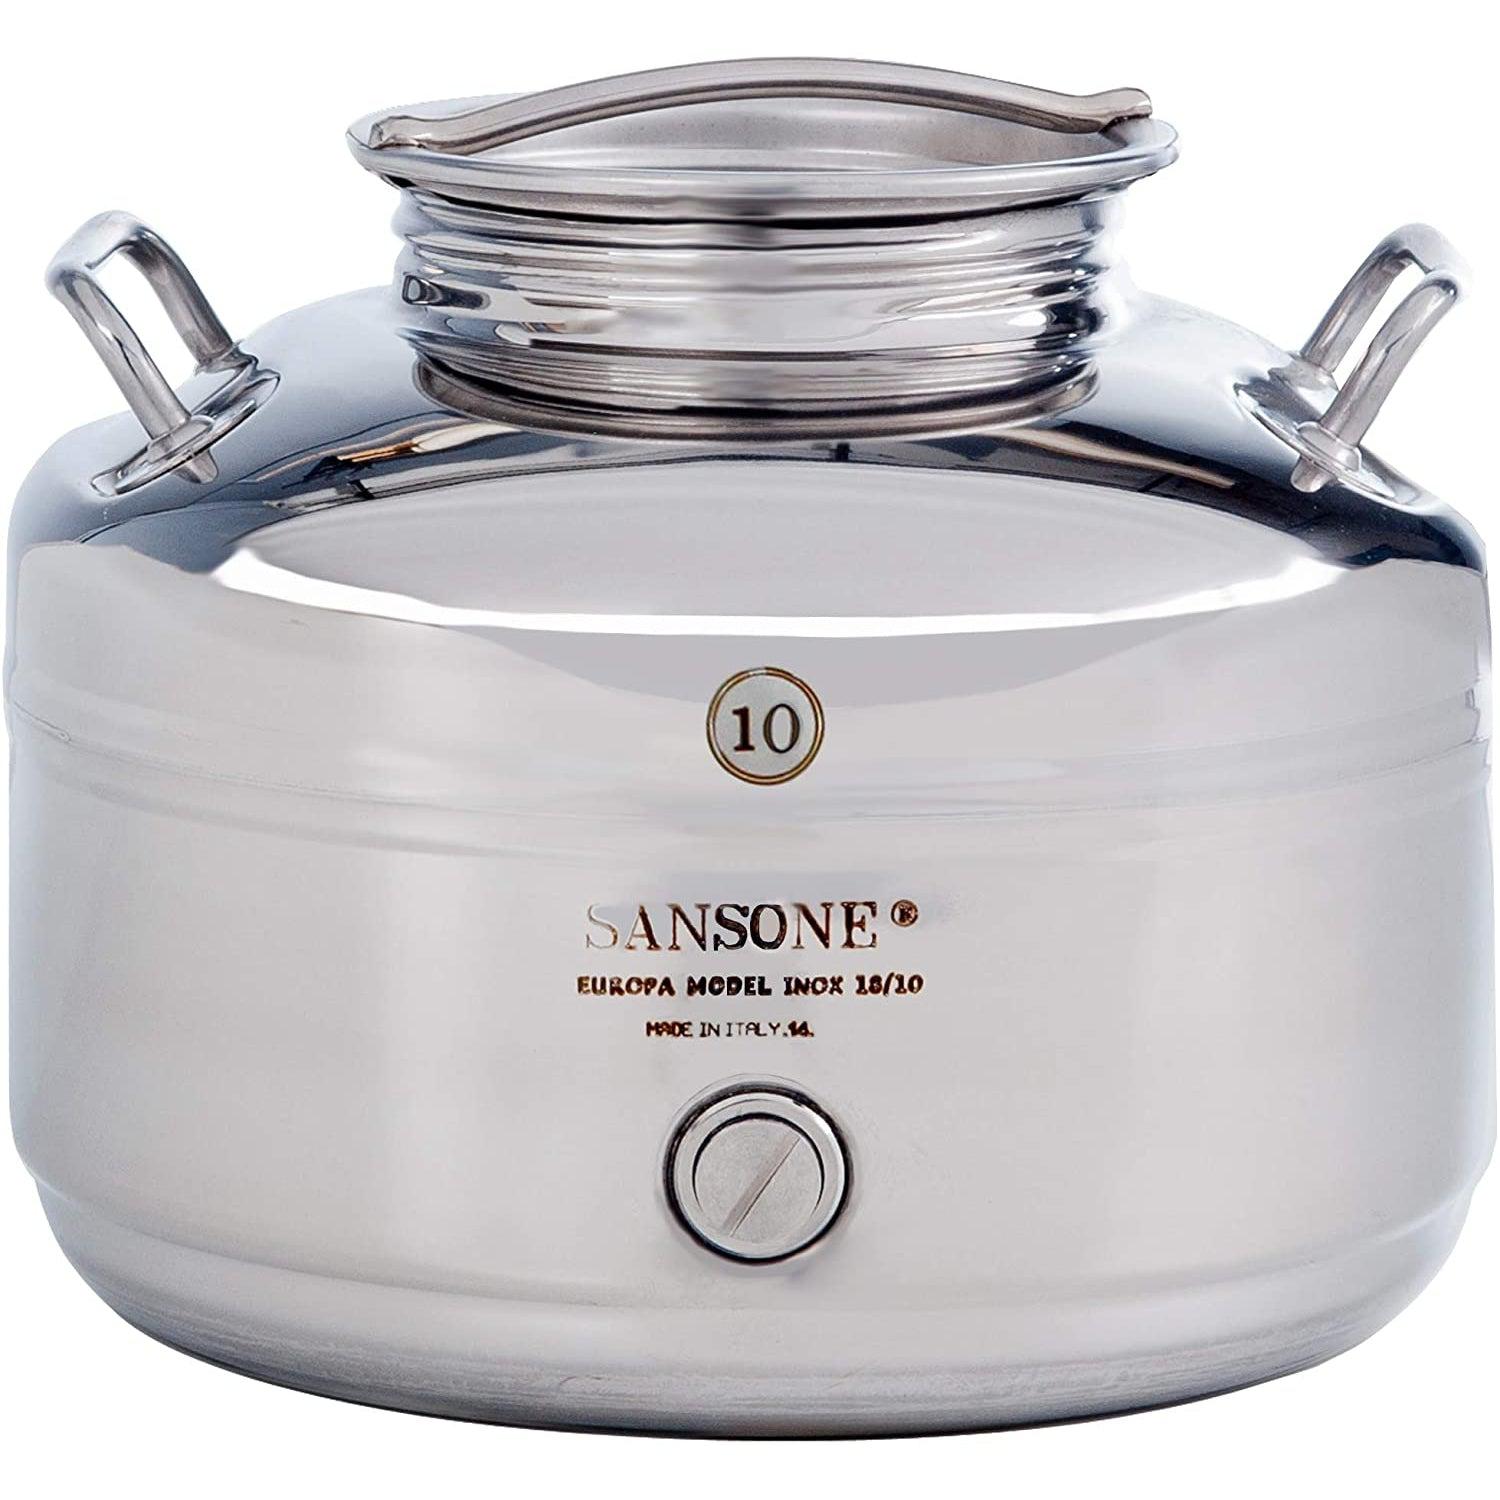 Sansone 2.64 gal Europa Fusti 18/10 Stainless Steel Canister - NSF Certified for Holding Olive Oil and More - Made in Italy